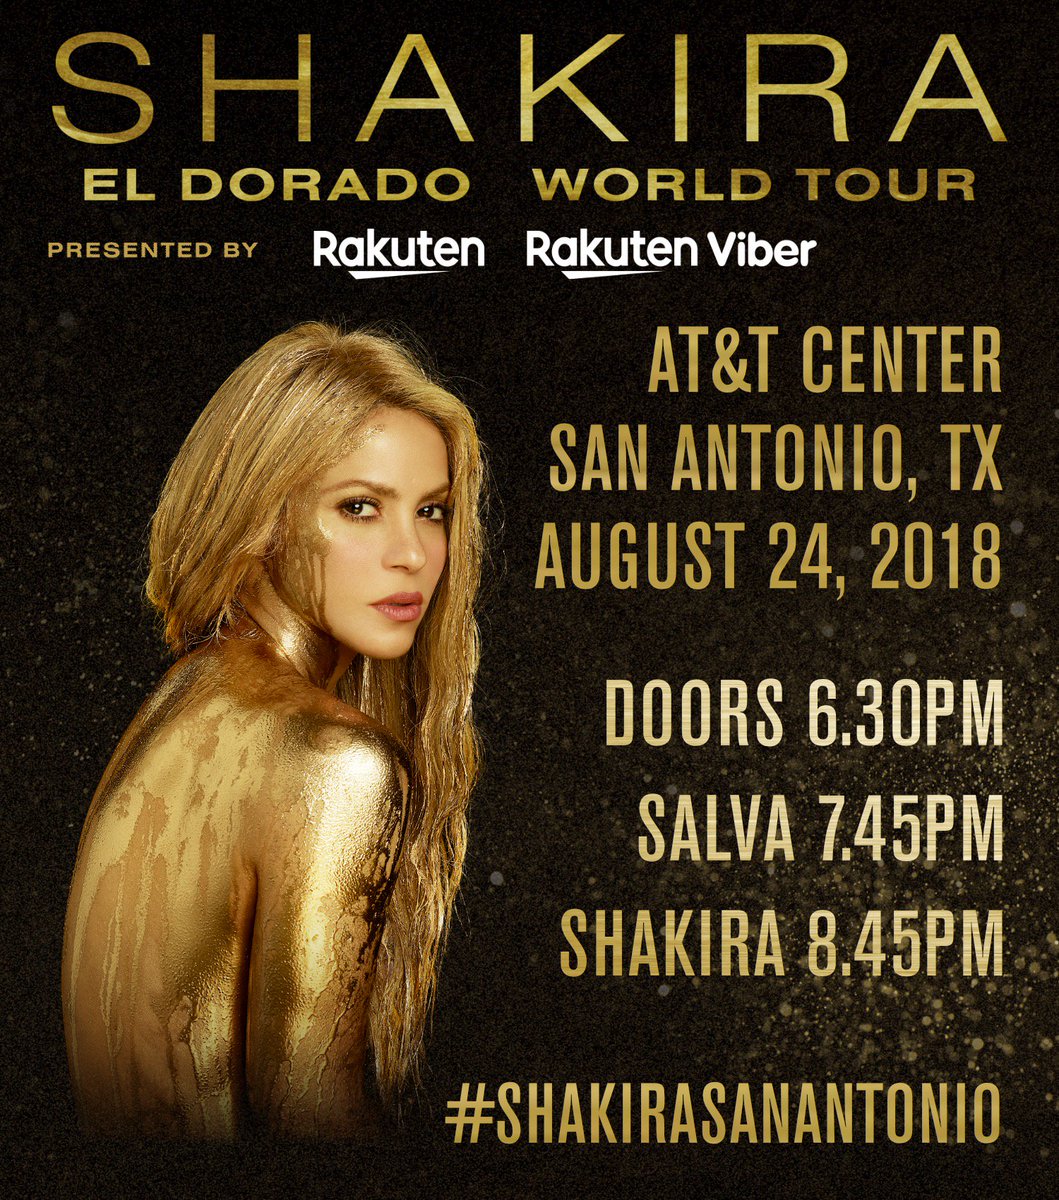 Here are the set times for tonight’s Sold Out #ShakiraSanAntonio show at @attcenter! ShakHQ https://t.co/camDDJdTMx